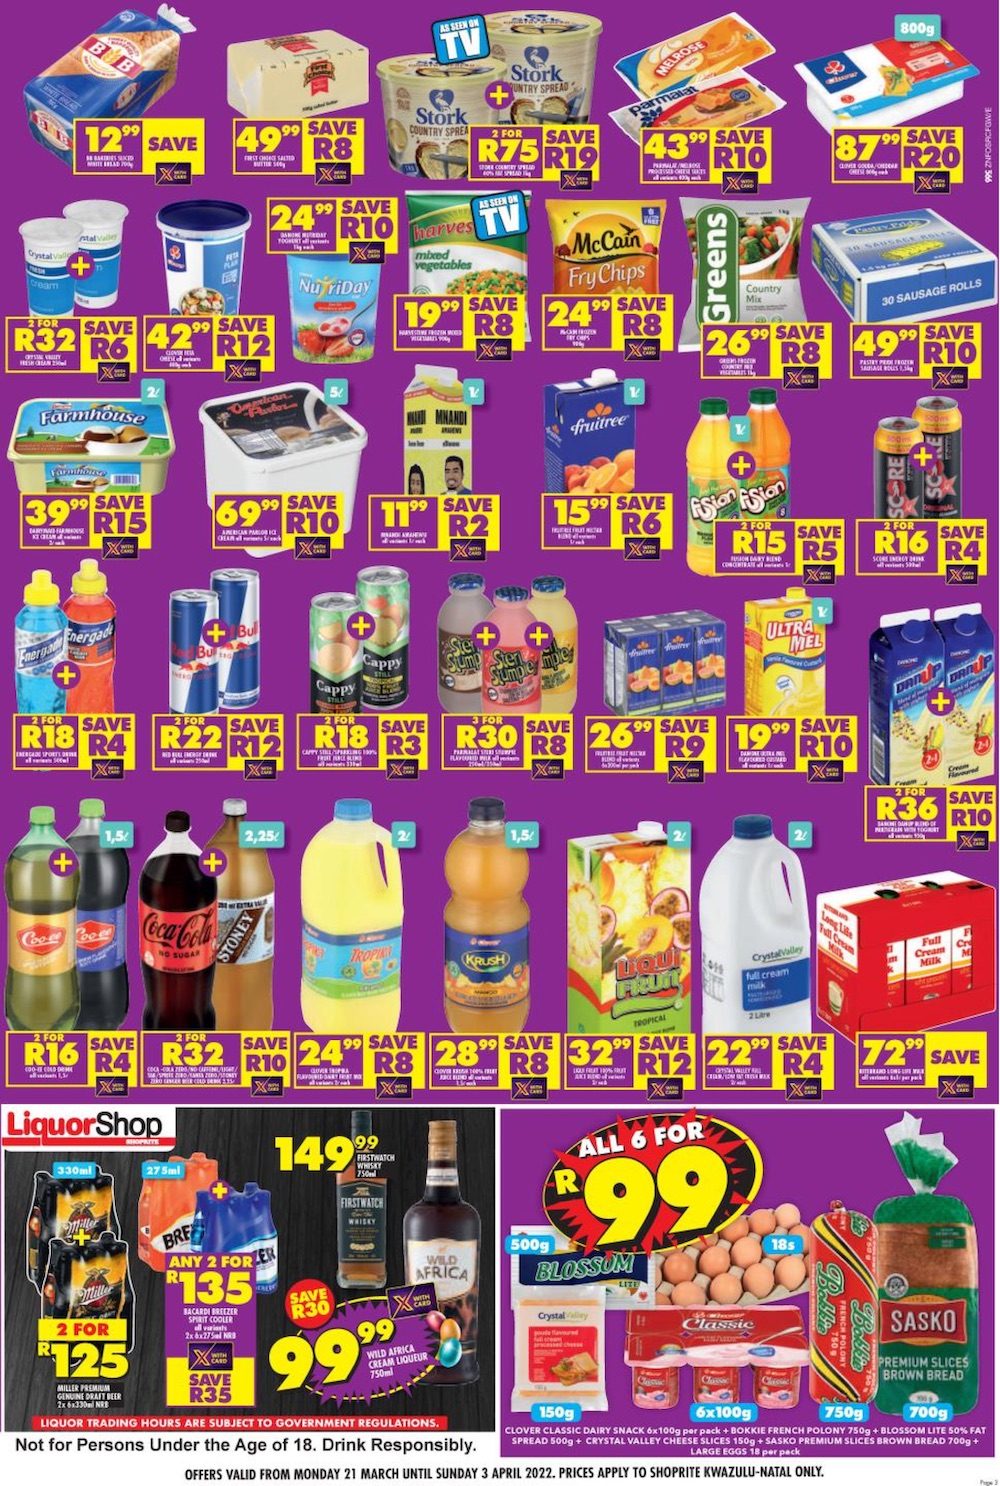 Shoprite Specials Early Easter Savings 2022 Shoprite Catalogue Easter